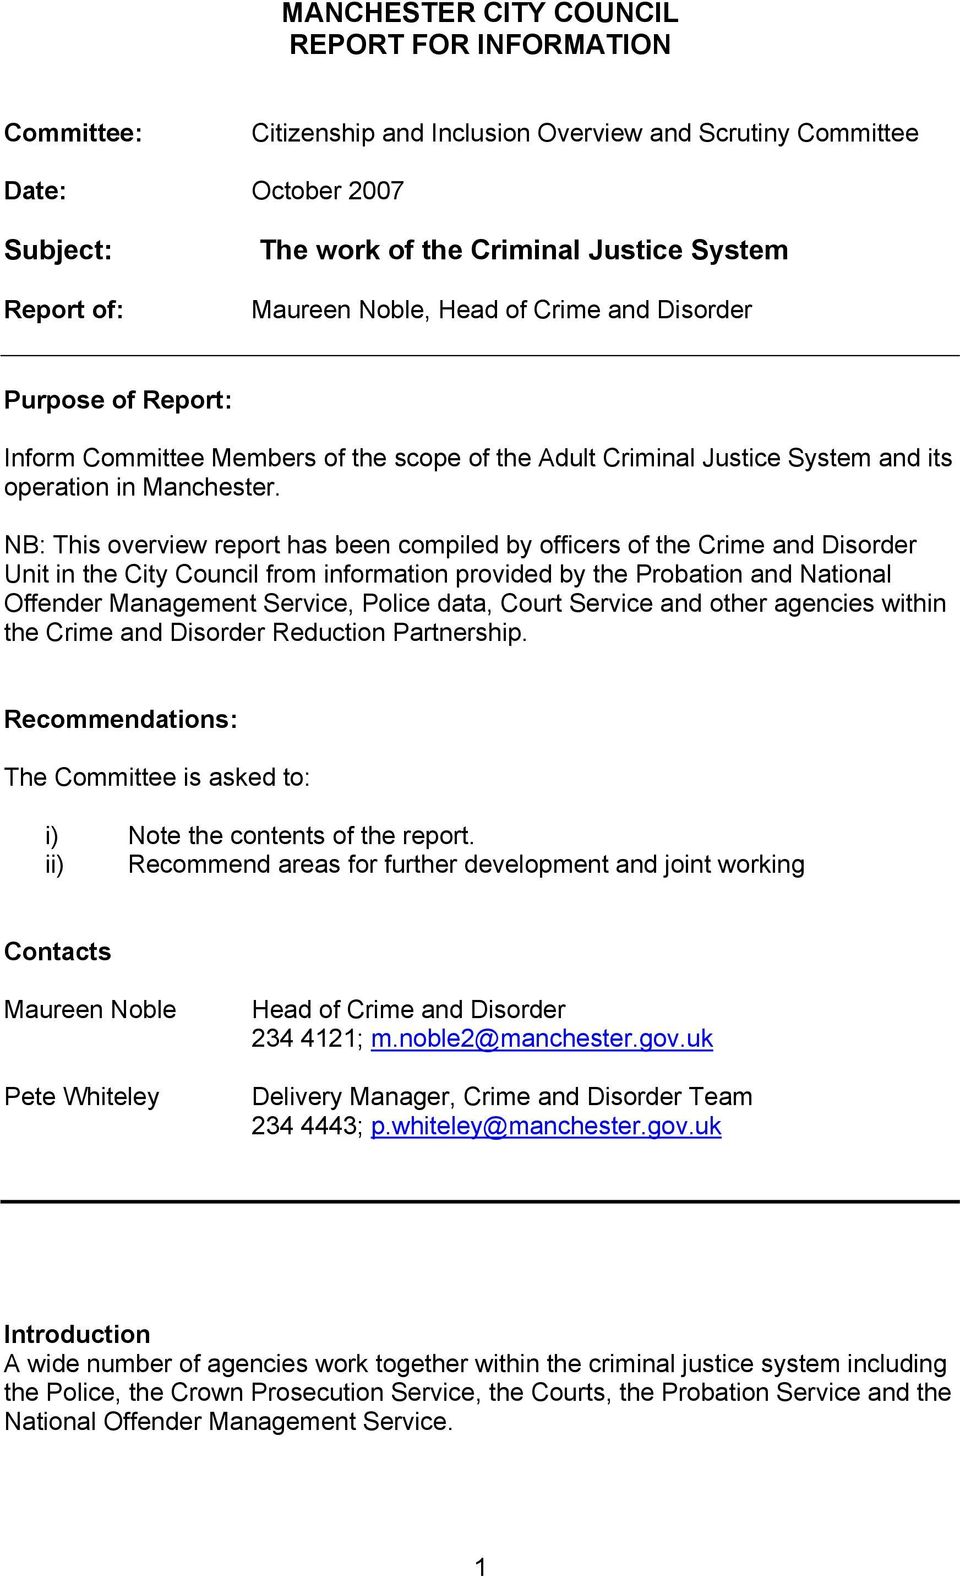 NB: This overview report has been compiled by officers of the Crime and Disorder Unit in the City Council from information provided by the Probation and National Offender Management Service, Police